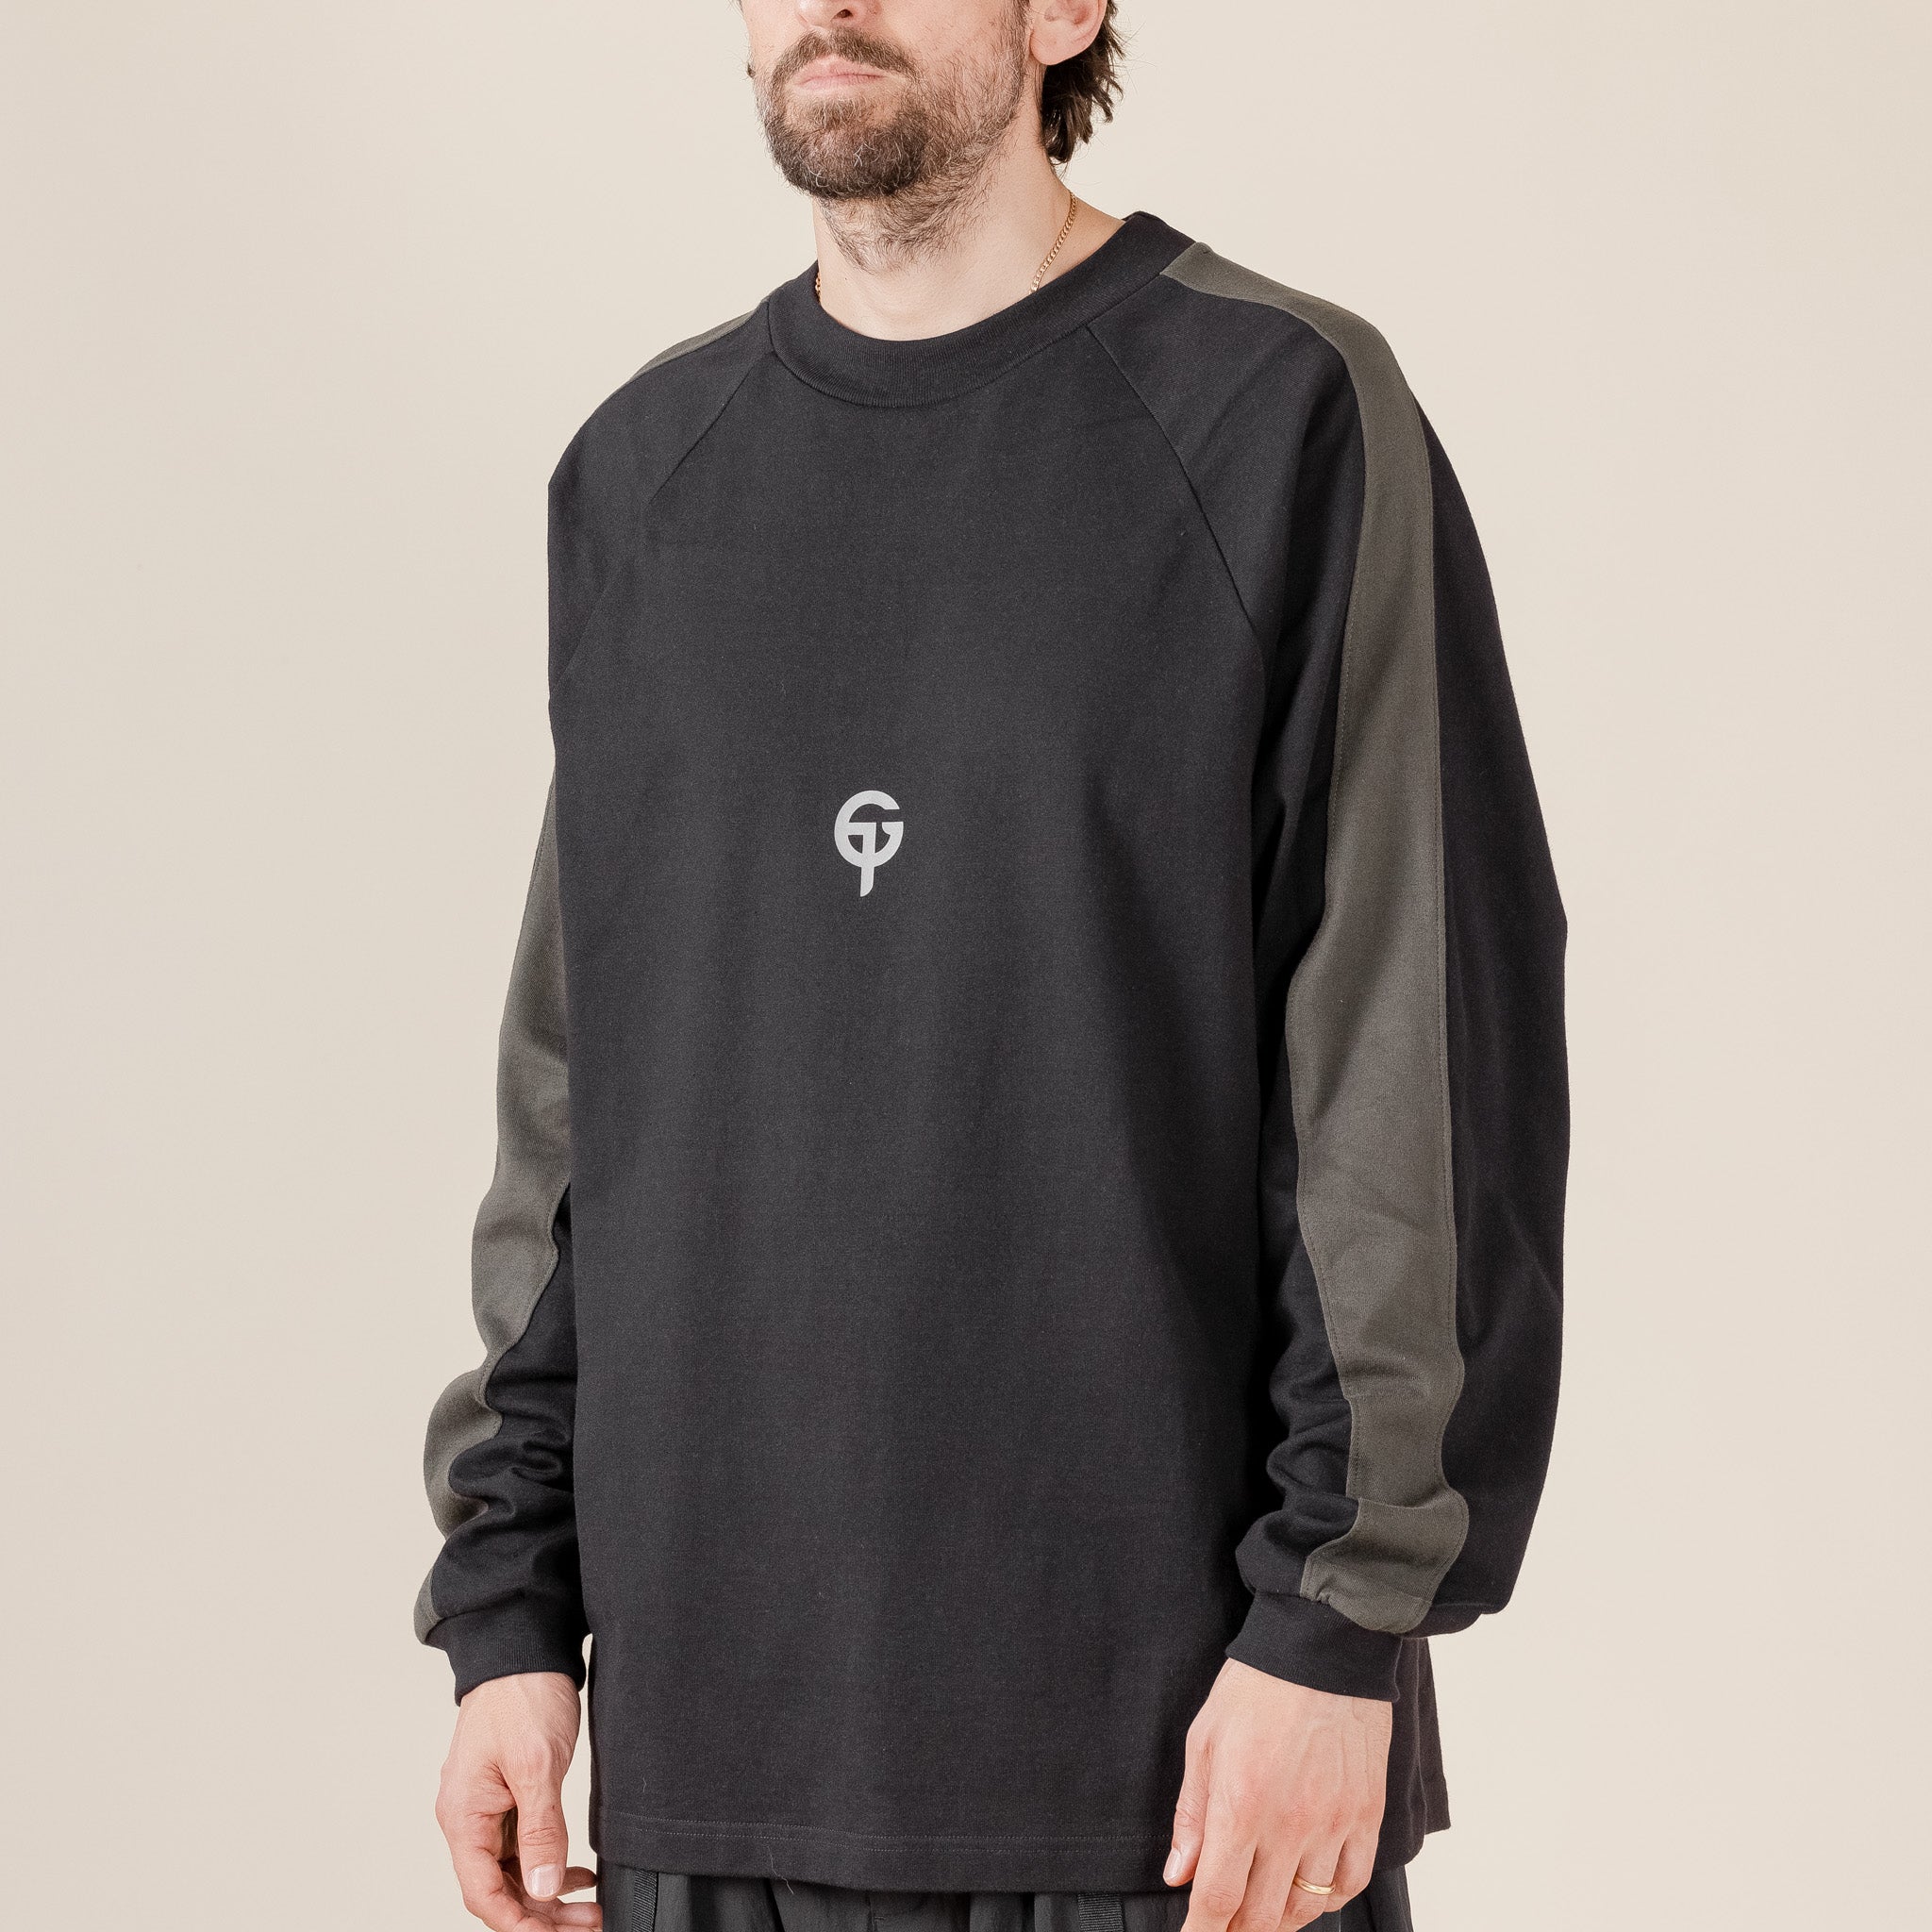 GOOPiMADE x TTOO - “Gof-T1” Binary Graphic L/S Tee - Black "goopimade this thing of ours" "goopimade TTOO collaboration"